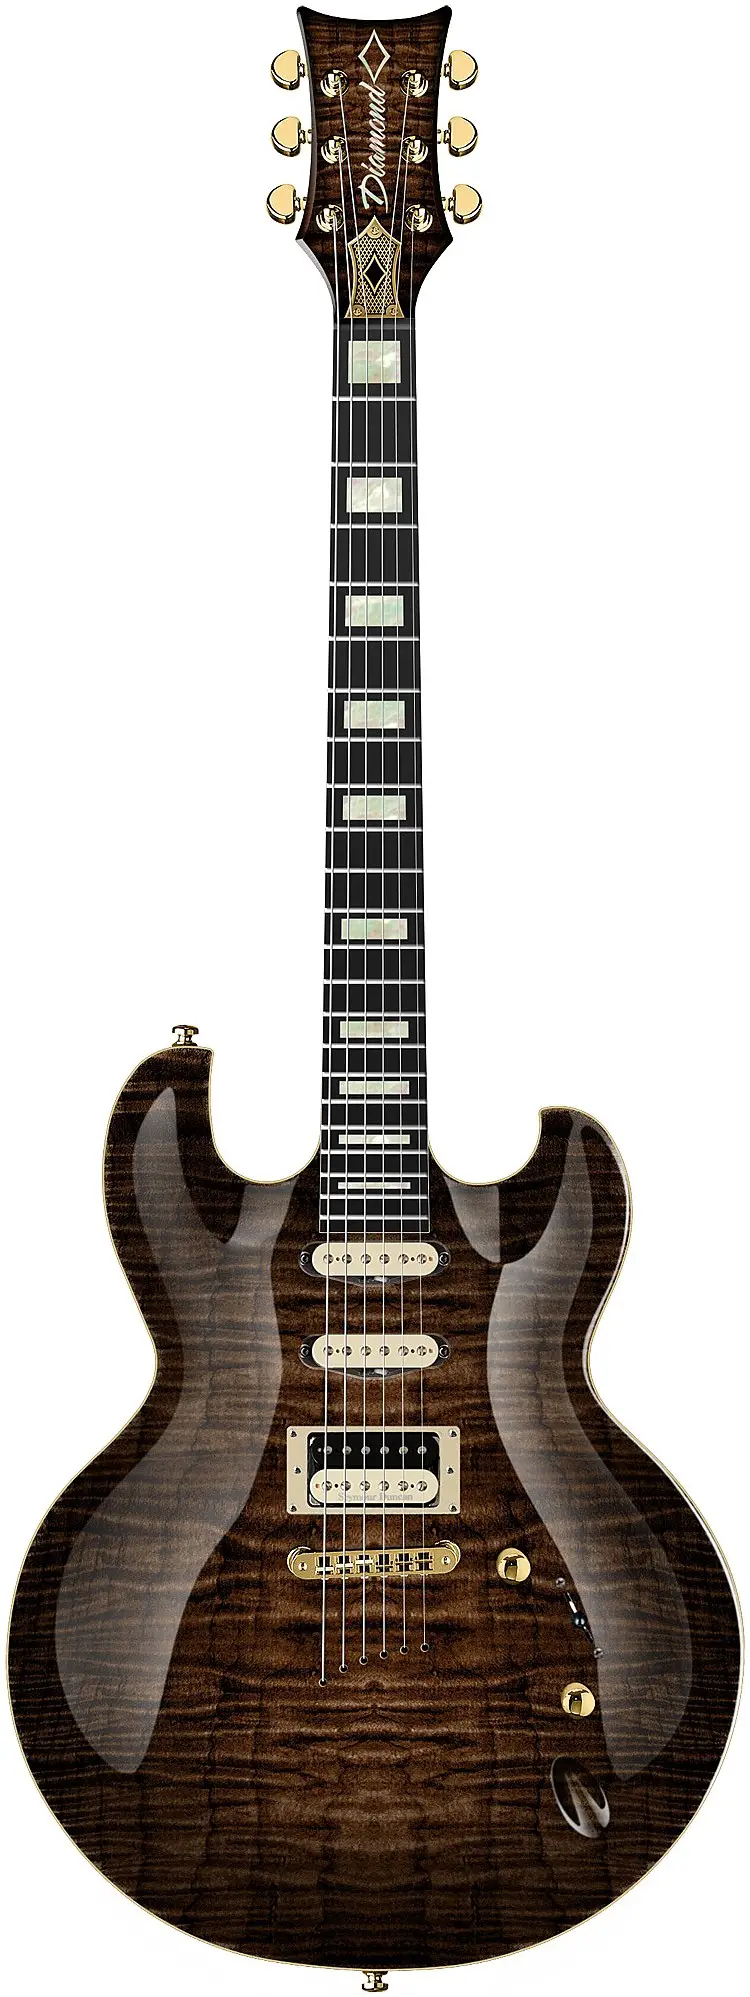 Imperial FM H/S/S by DBZ Guitars